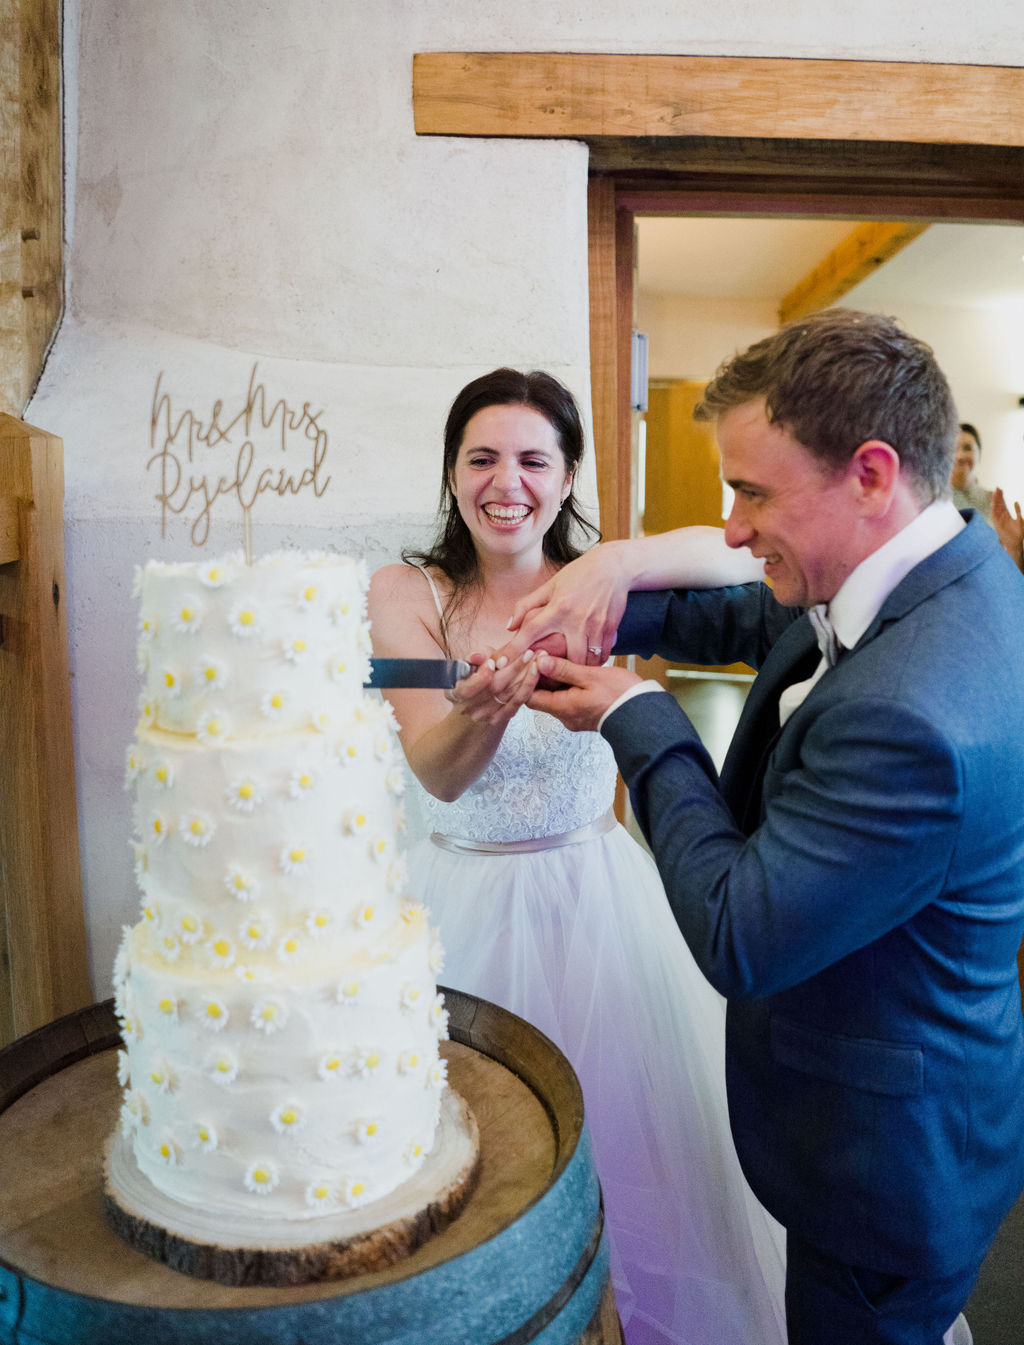 Upton Barn and Walled Gardens wedding, the bride and groom cut the cake.